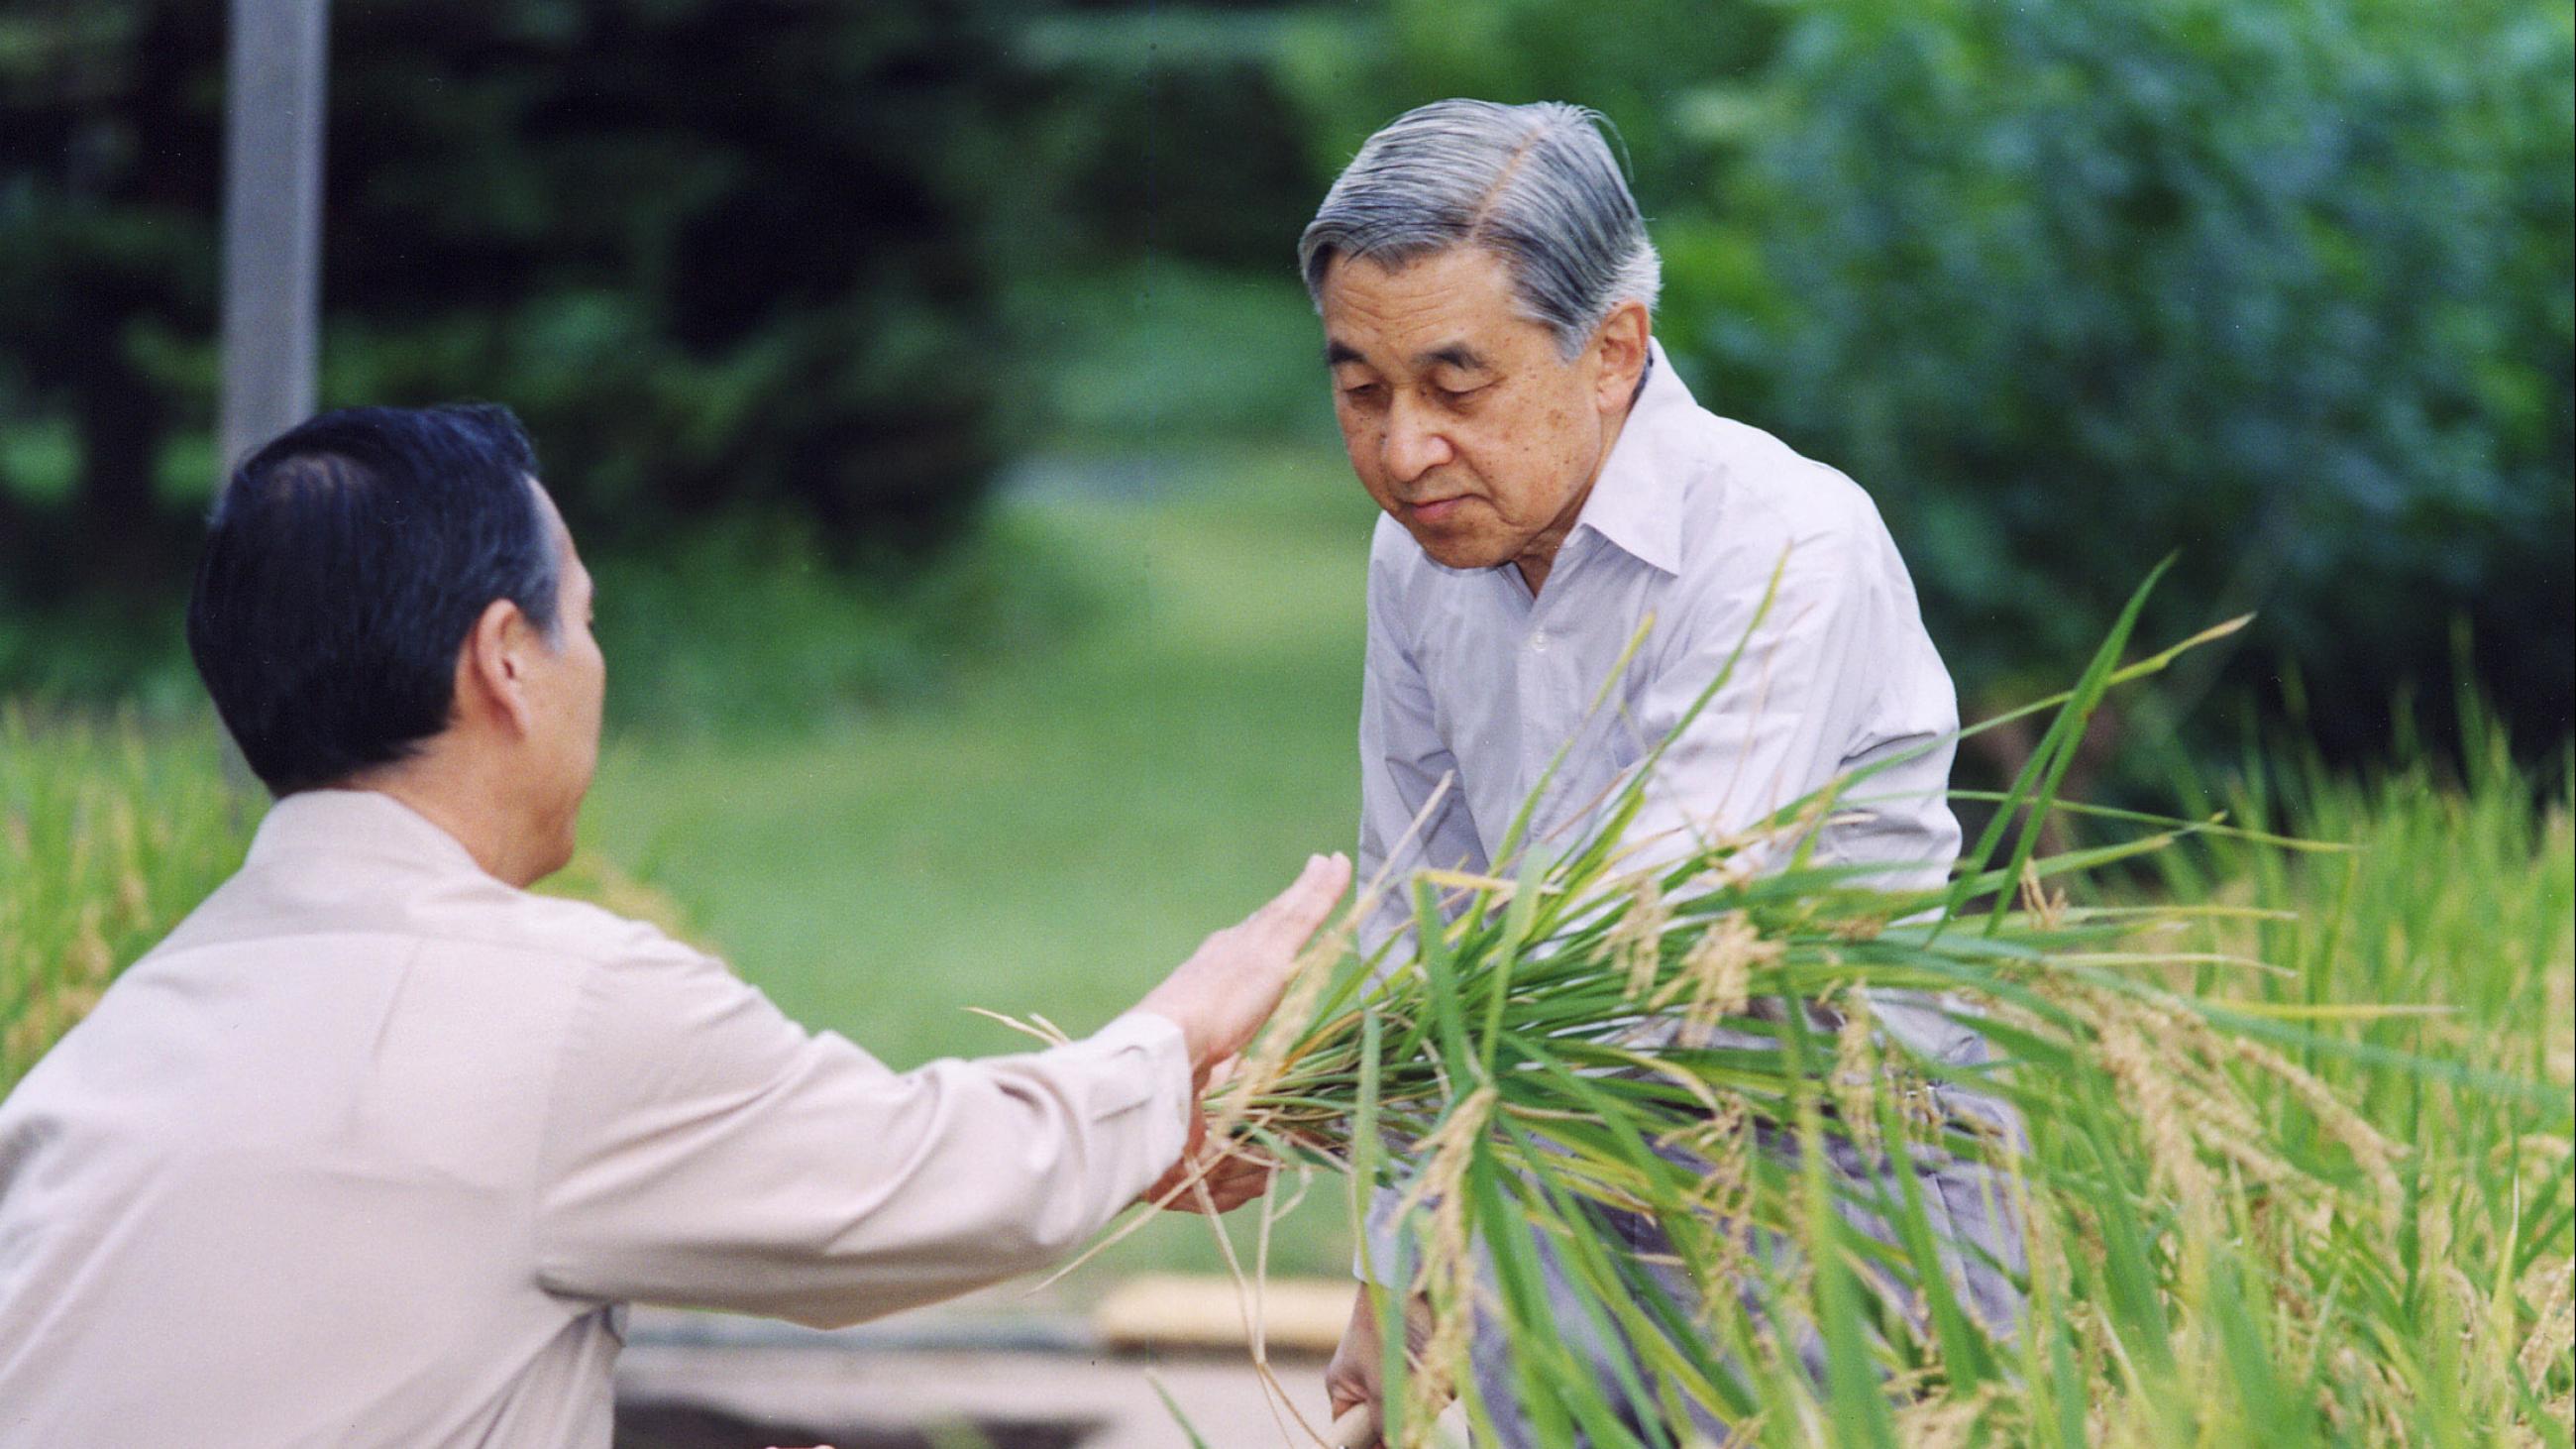 Japan's Emperor Akihito (R) is helped by an unidentified palace official after he harvested rice on a paddy field in the compounds of the Imperial Palace grounds in Tokyo, on September 25, 2006.